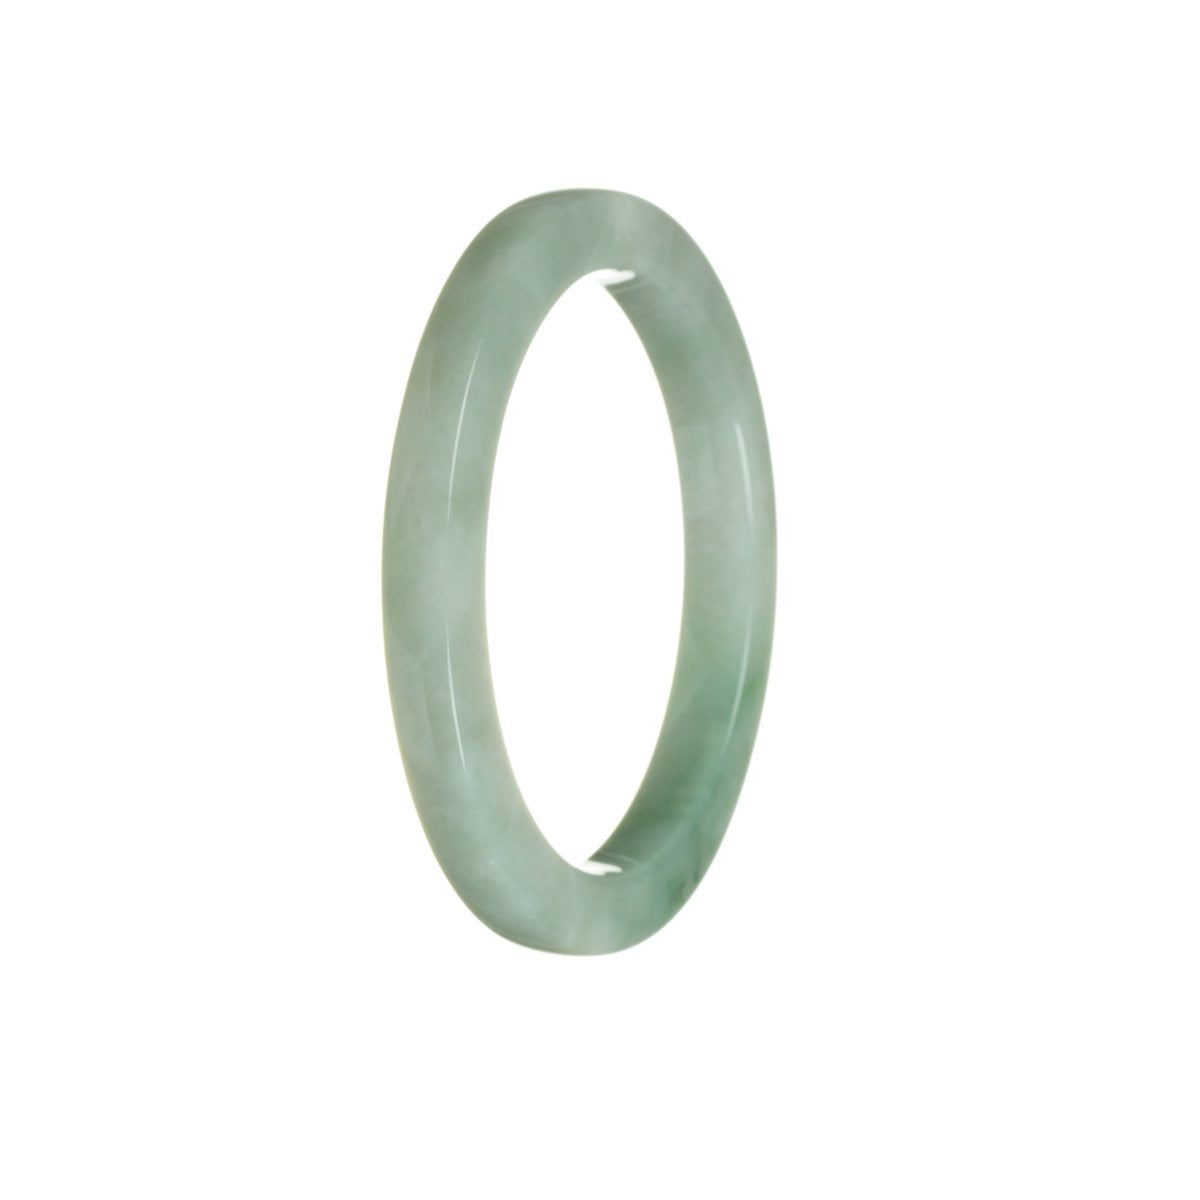 A close-up photo of a thin pale green jade bracelet with a traditional design.